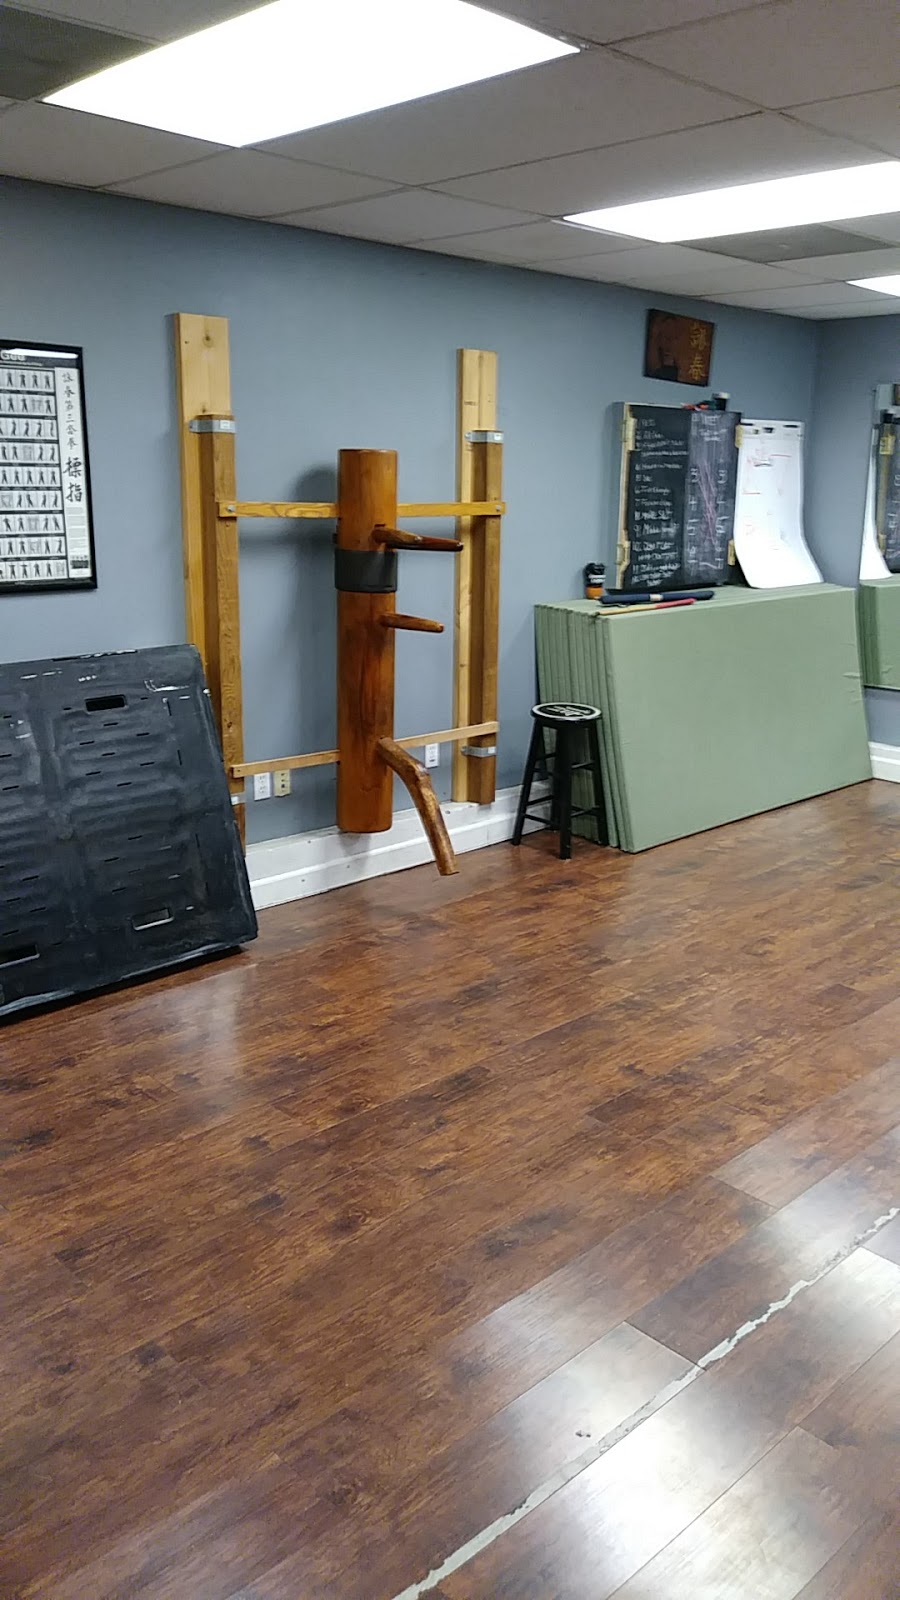 West County Wing Chun | 298-R, Vance Rd, Valley Park, MO 63088, USA | Phone: (314) 919-6108